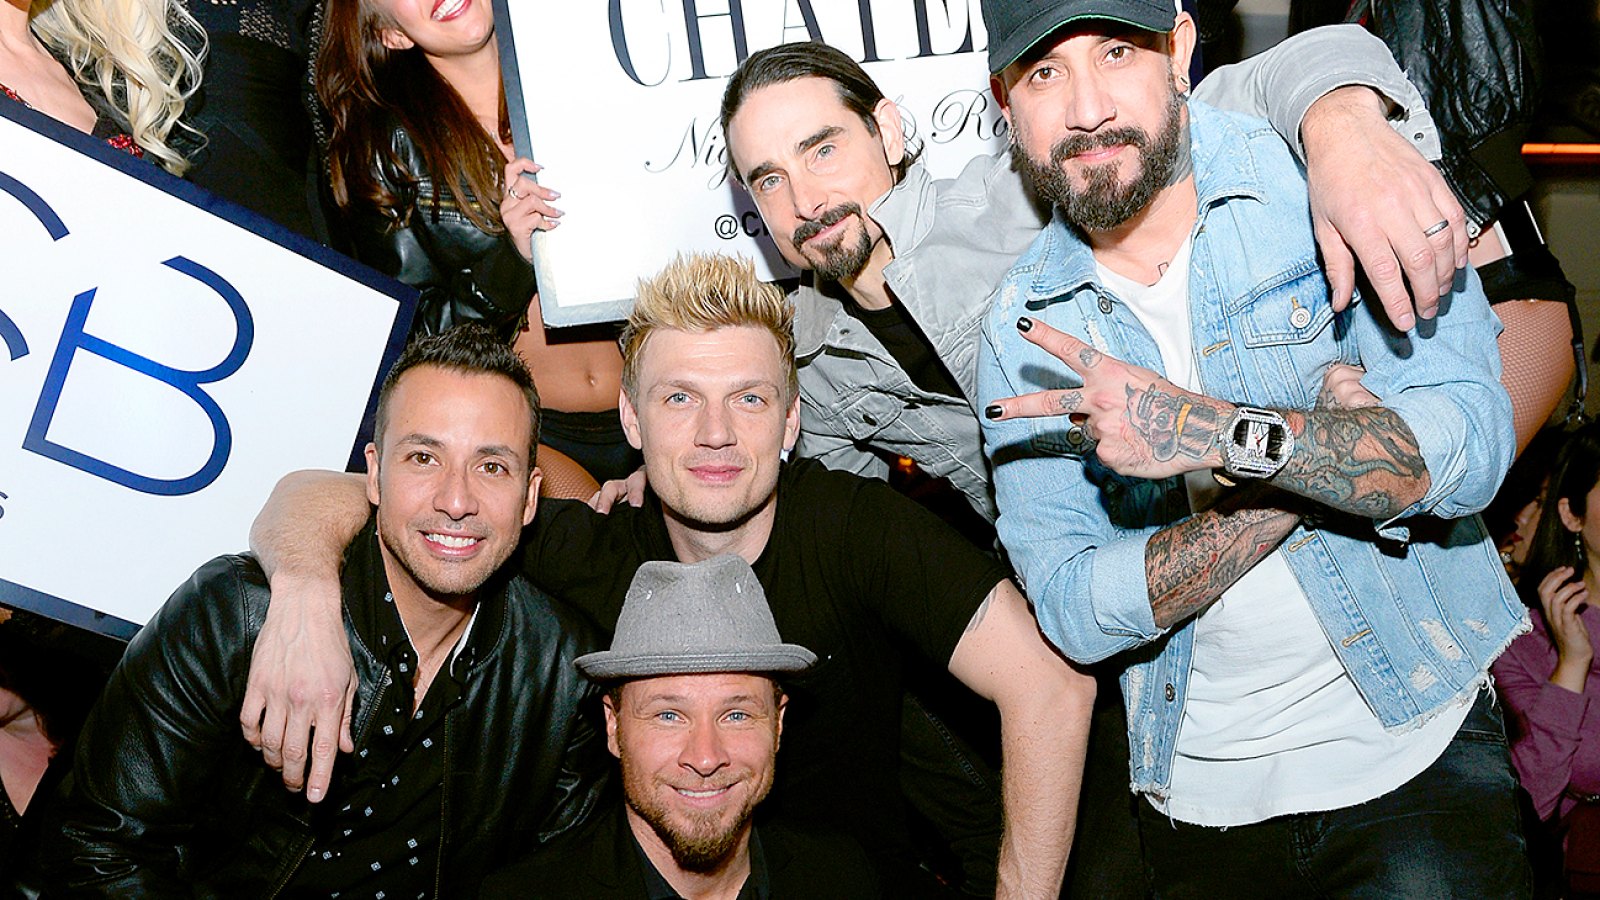 What It'S Like To Party With The Backstreet Boys